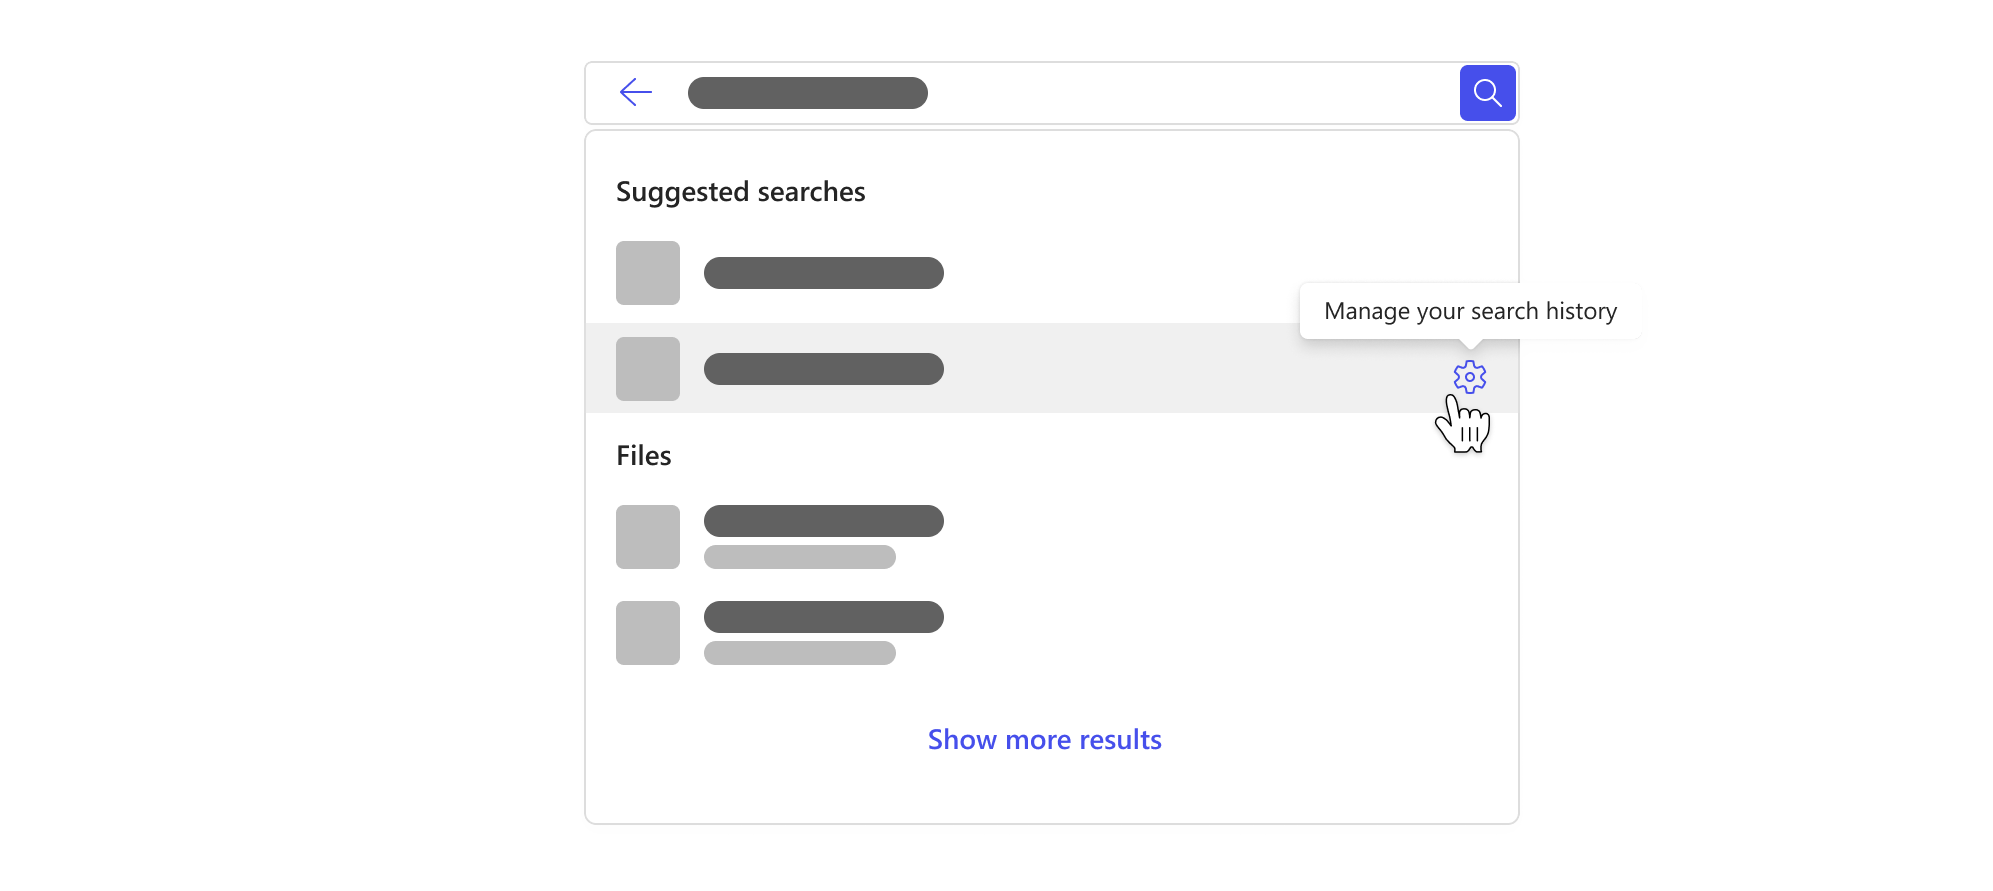 Search box with a dropdown highlighting the suggested searches based on your search history and a button to manage your search history.